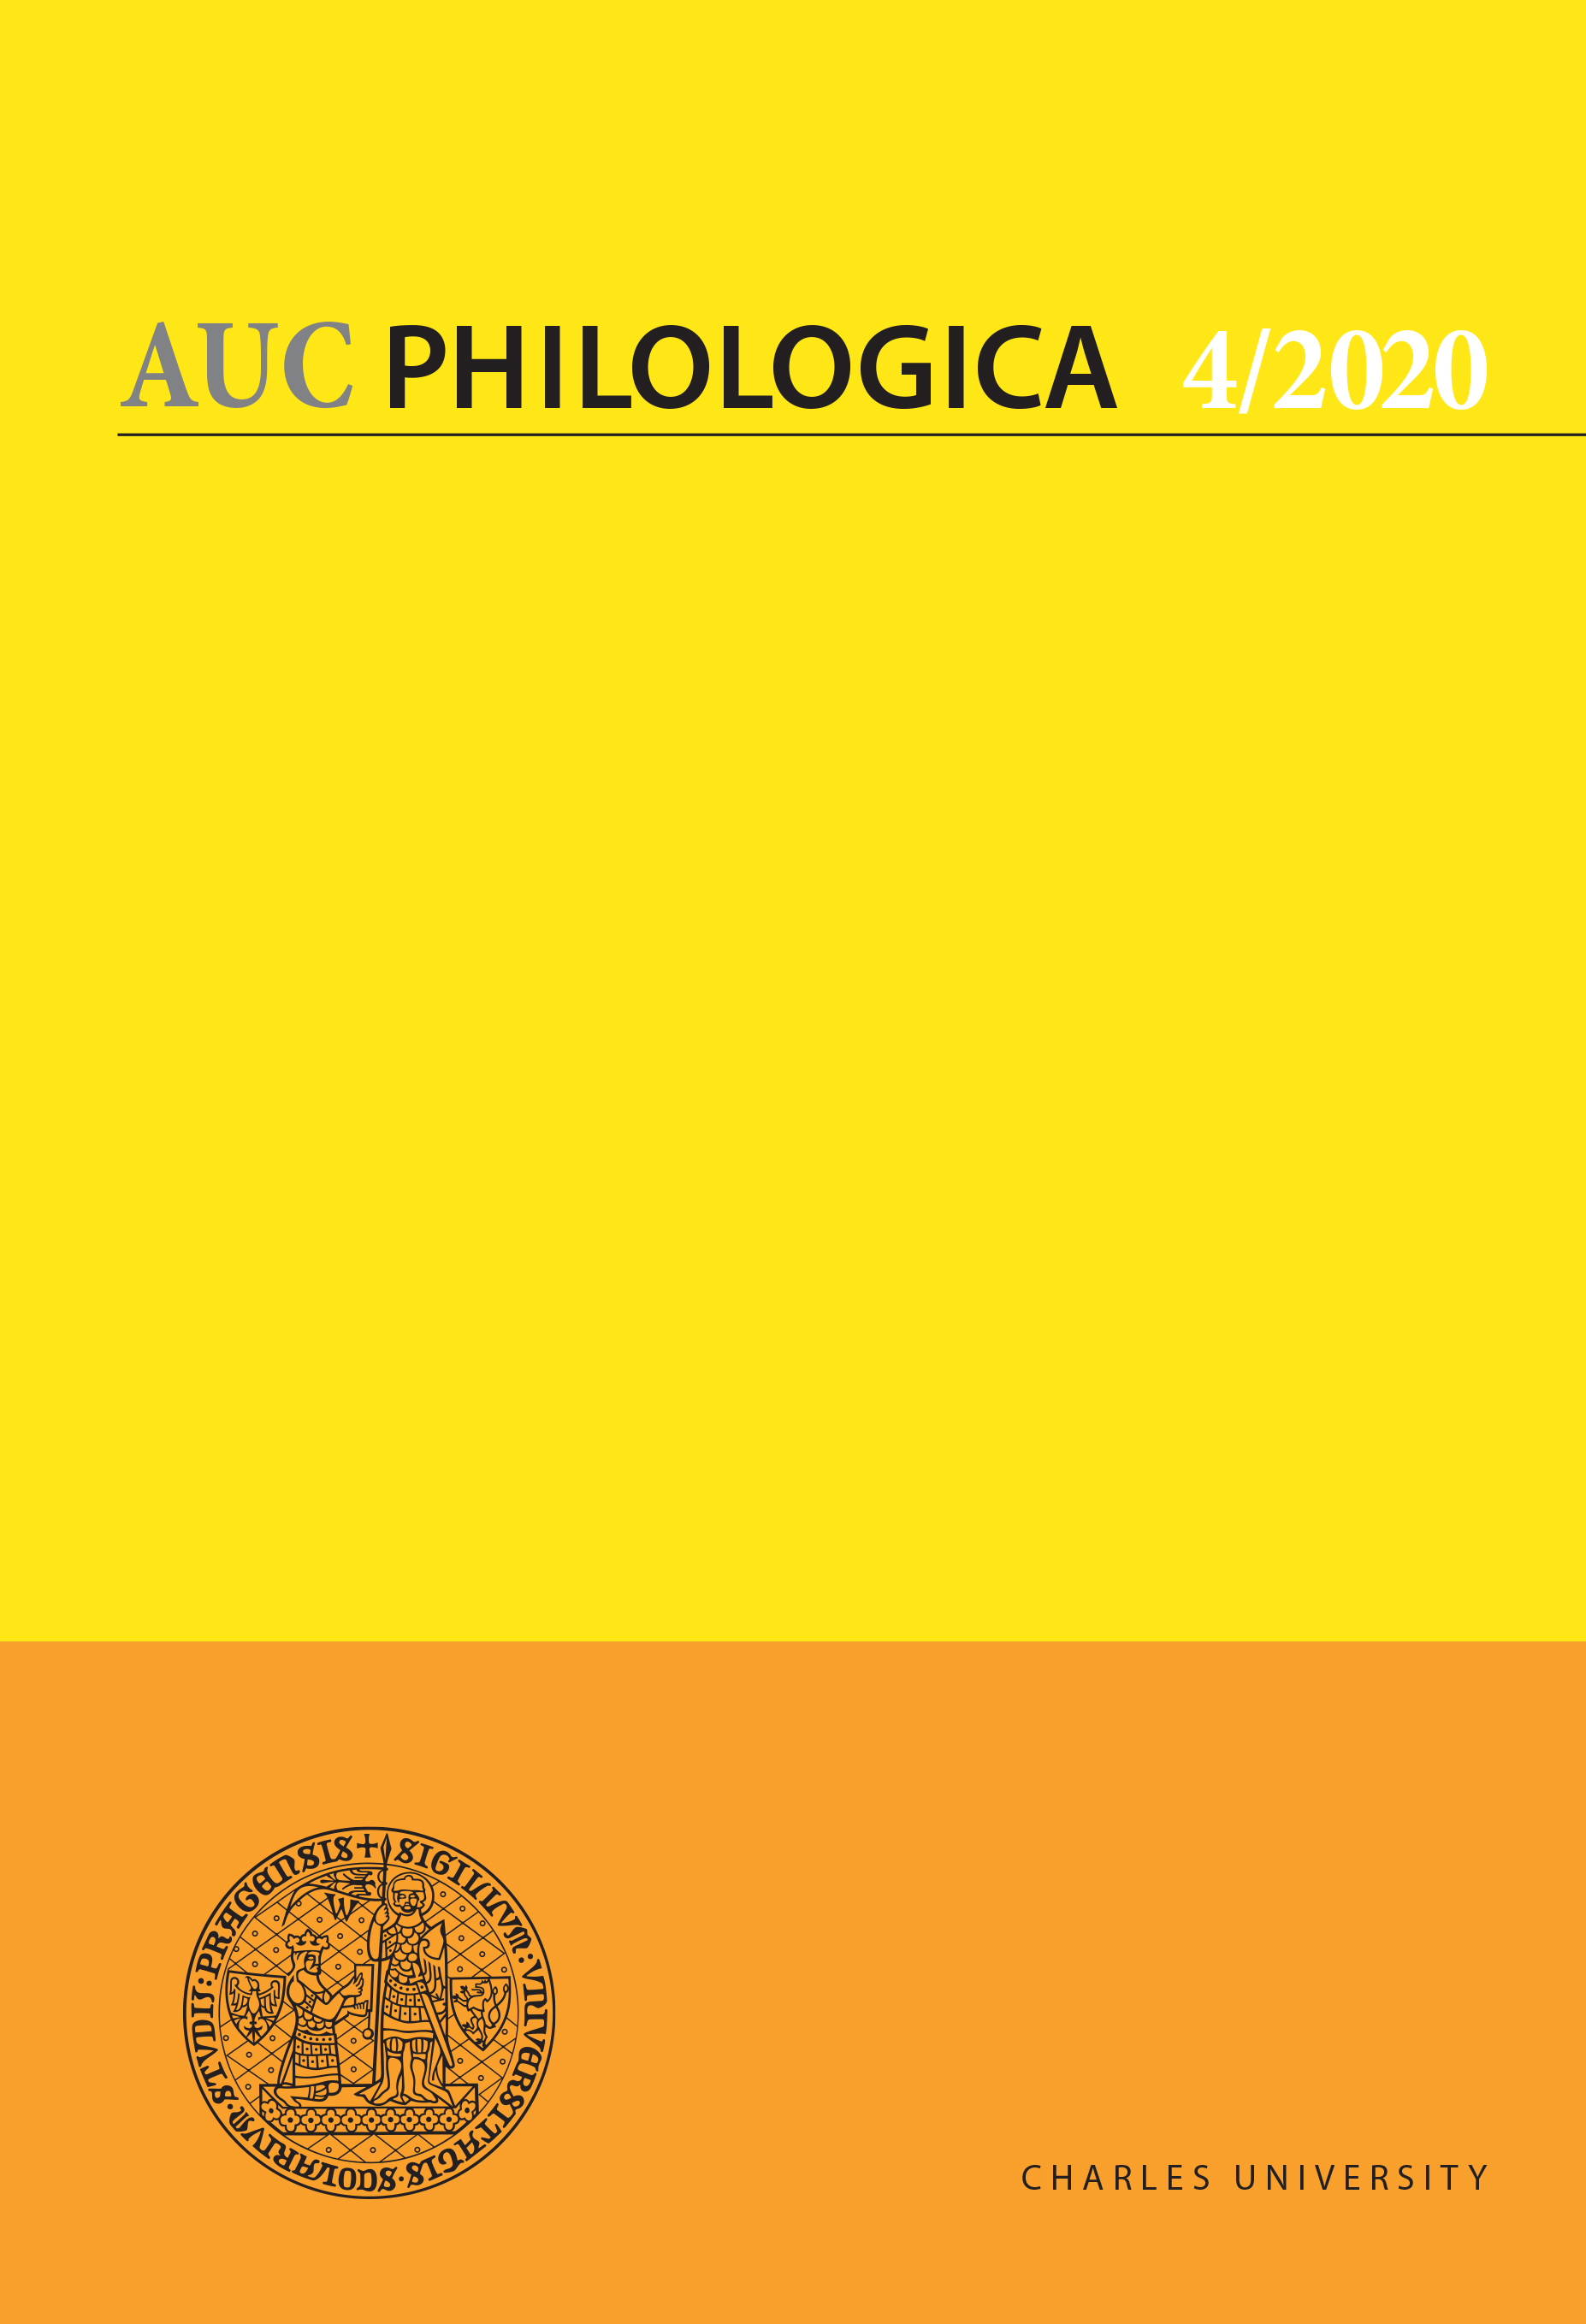 Class Action, Variously Adapted in French, Polisch and Czech languages: Linguistic Reflections Cover Image